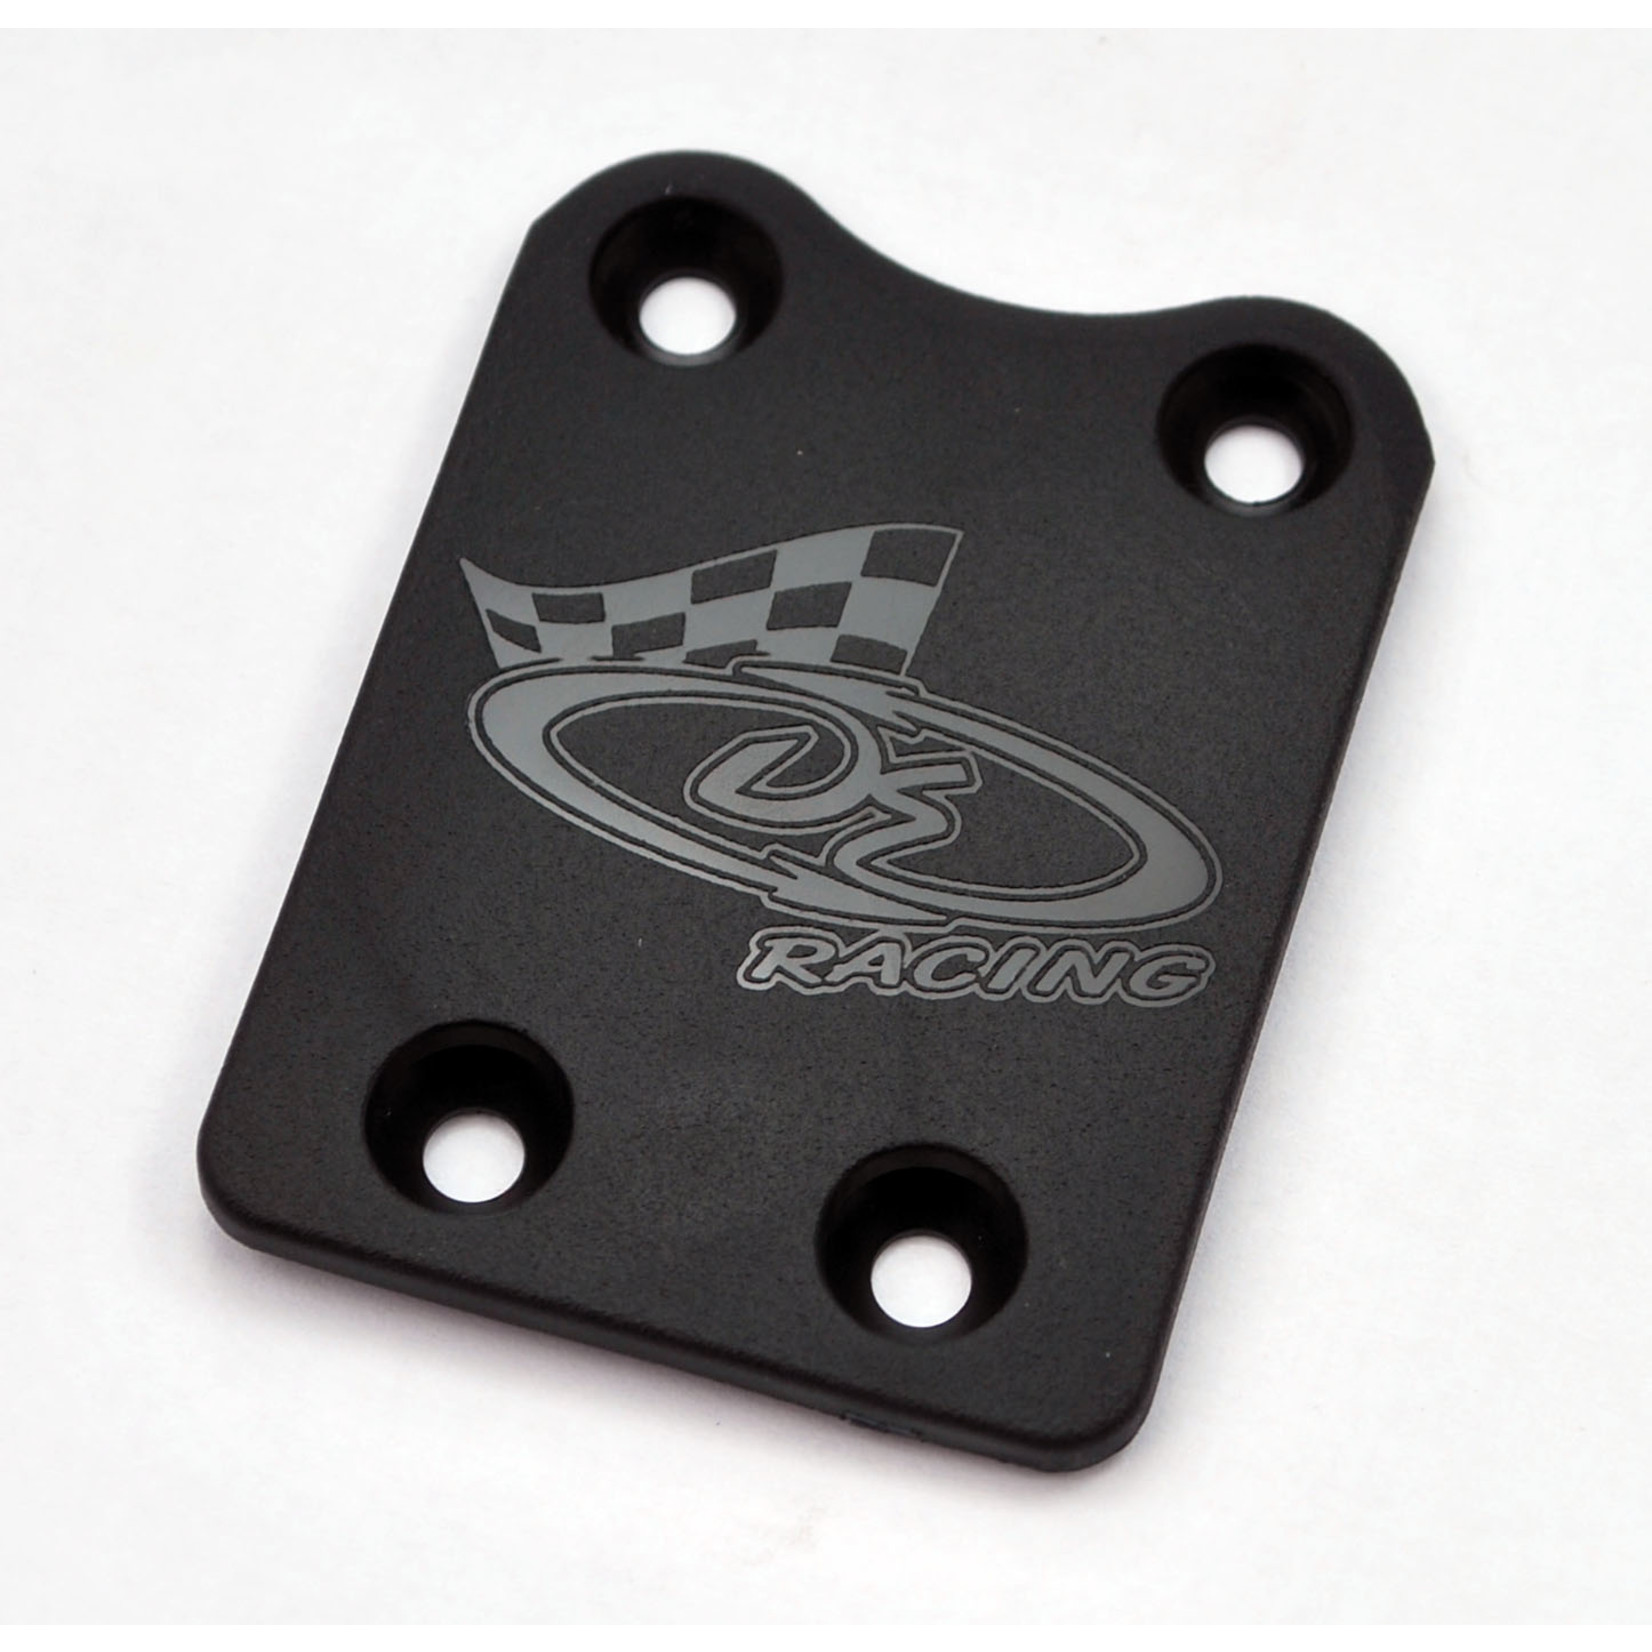 DE Racing XD Rear Skid Plate for Kyosho MP9 / MP9E